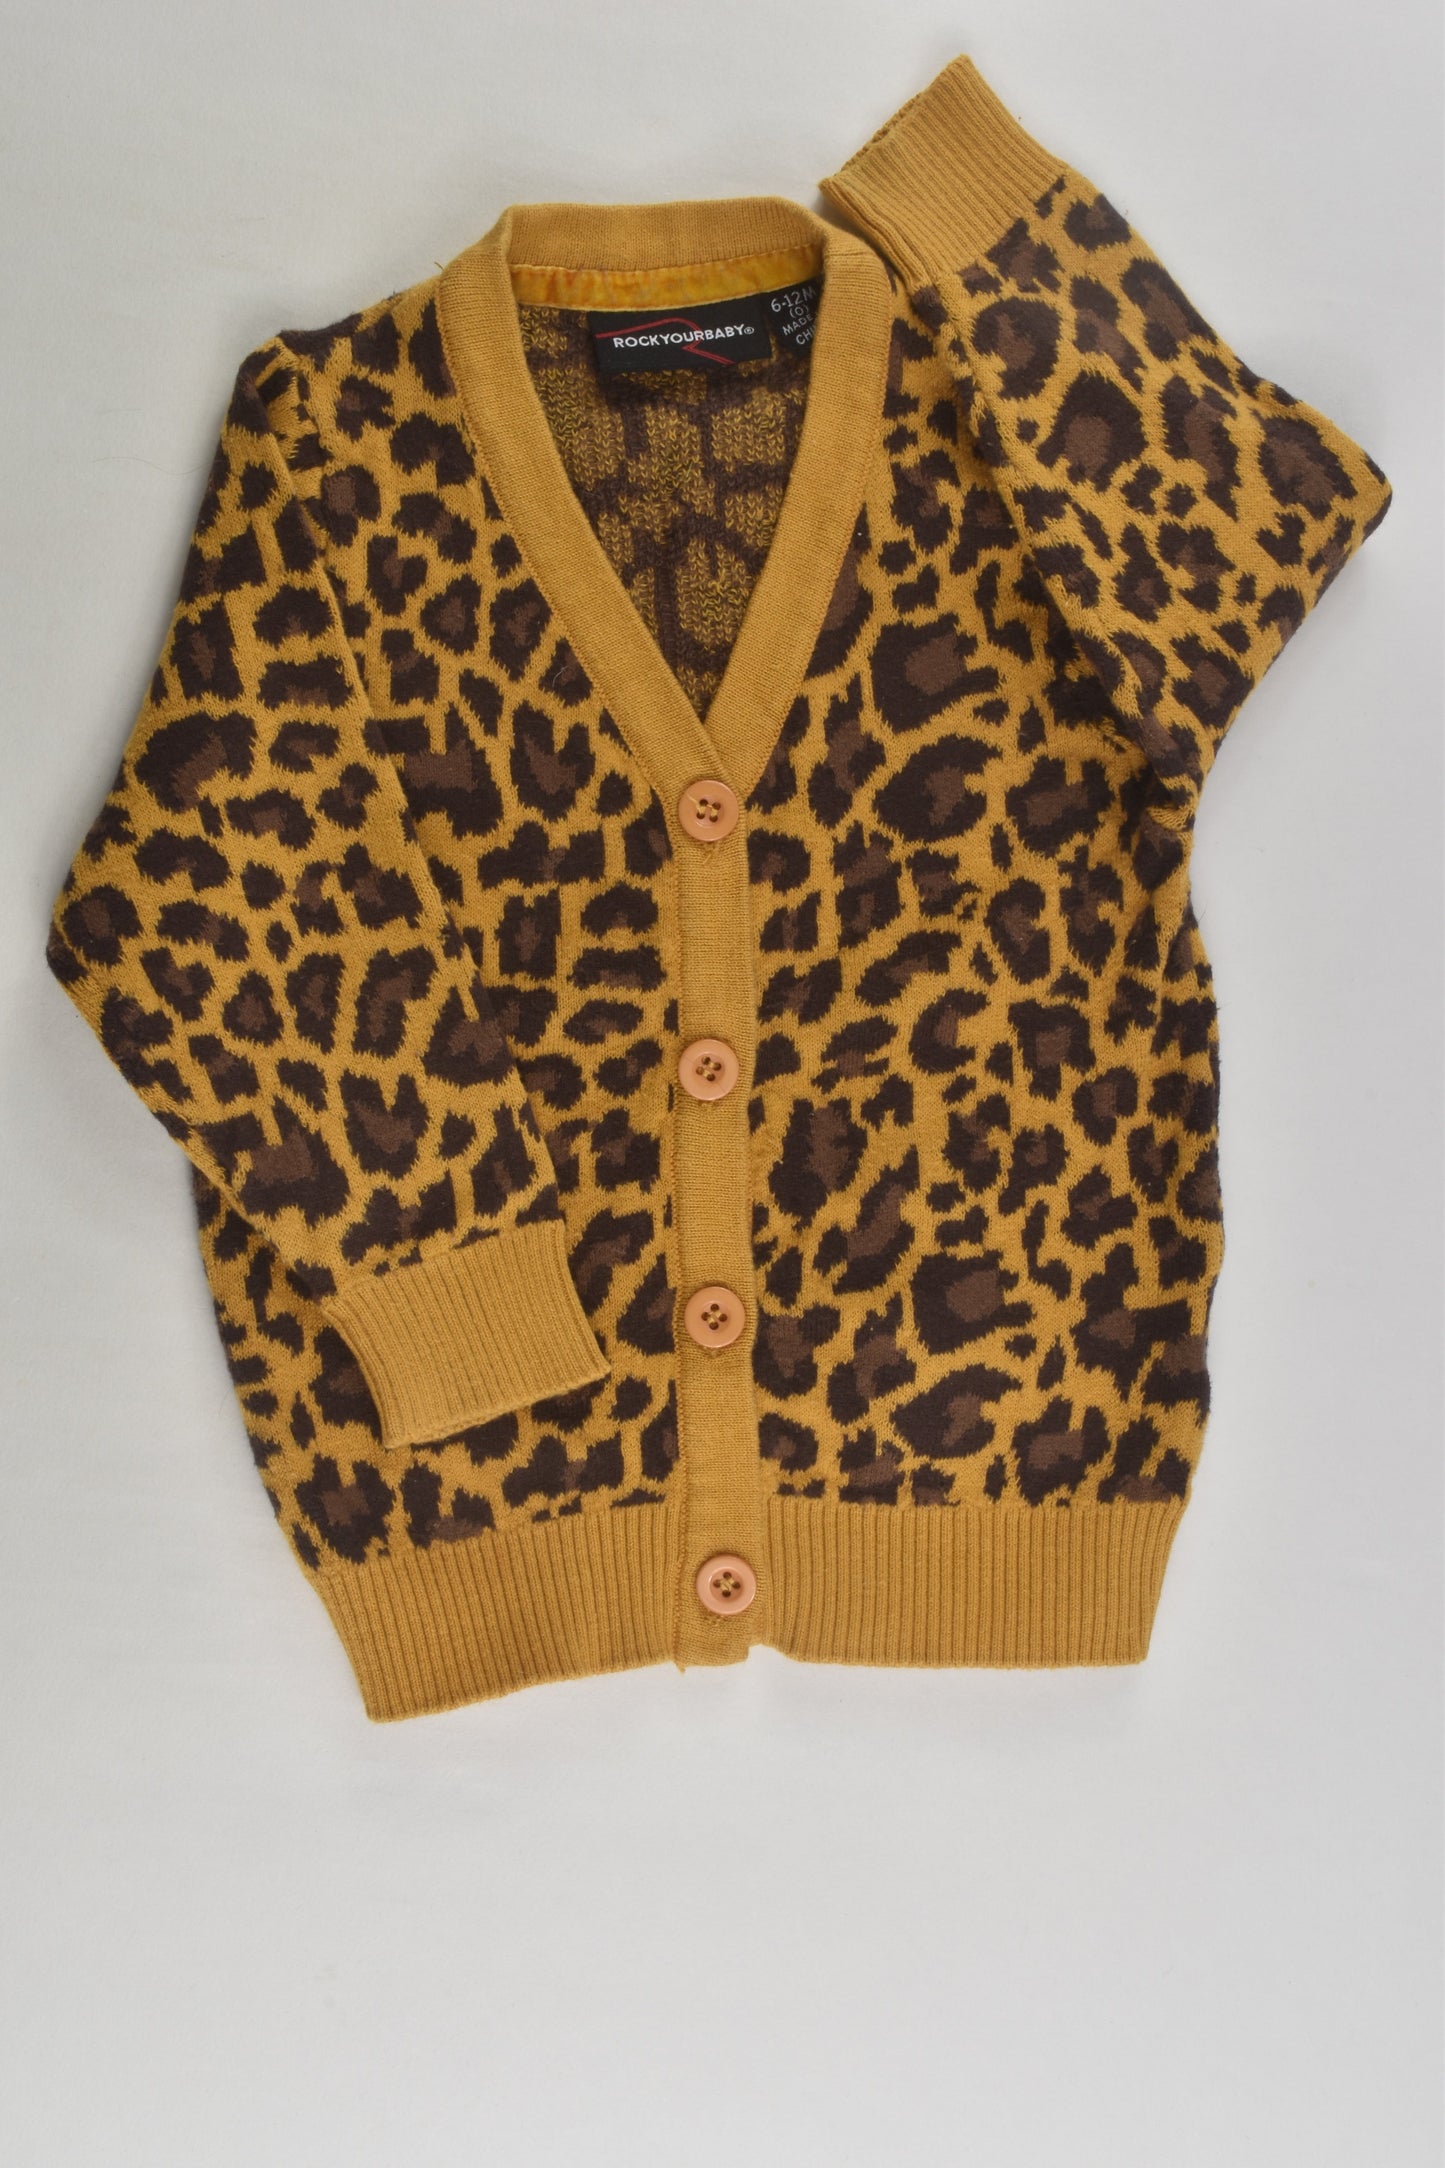 Rock Your Baby Size 0 Leopard Print Knit Cardigan